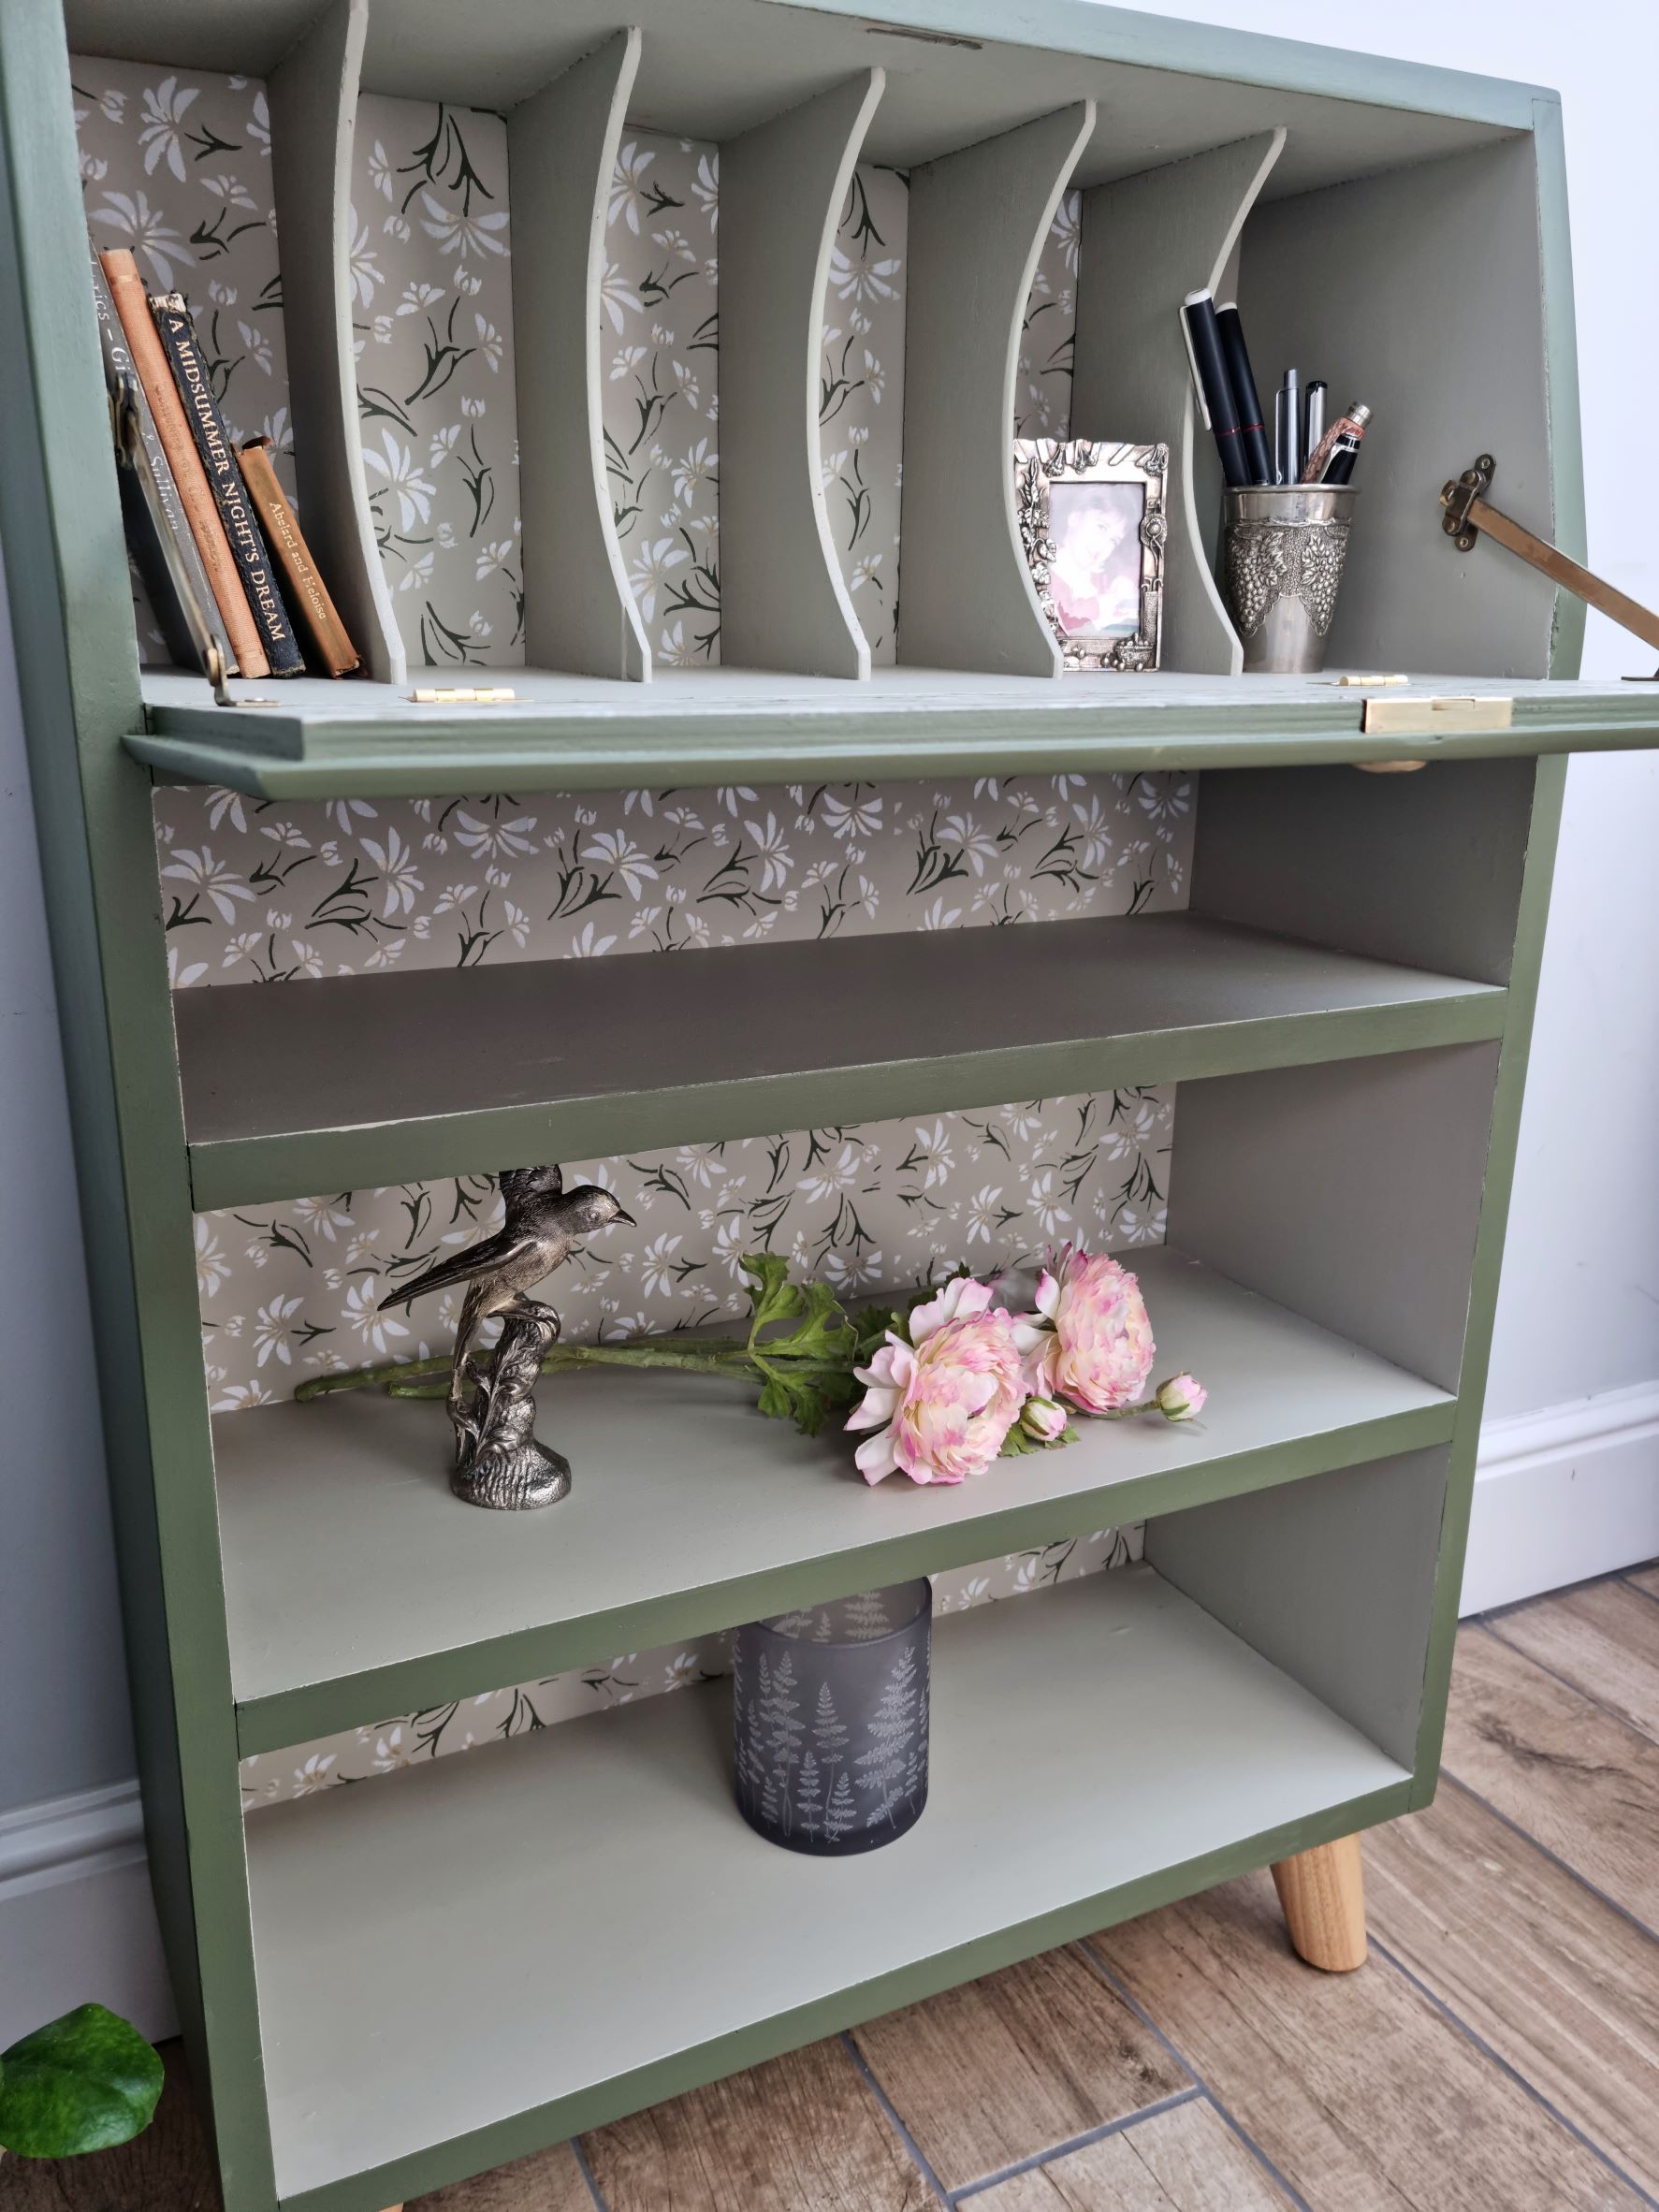 Bureau Writing Desk with display shelves upcycled & painted in green with daisies